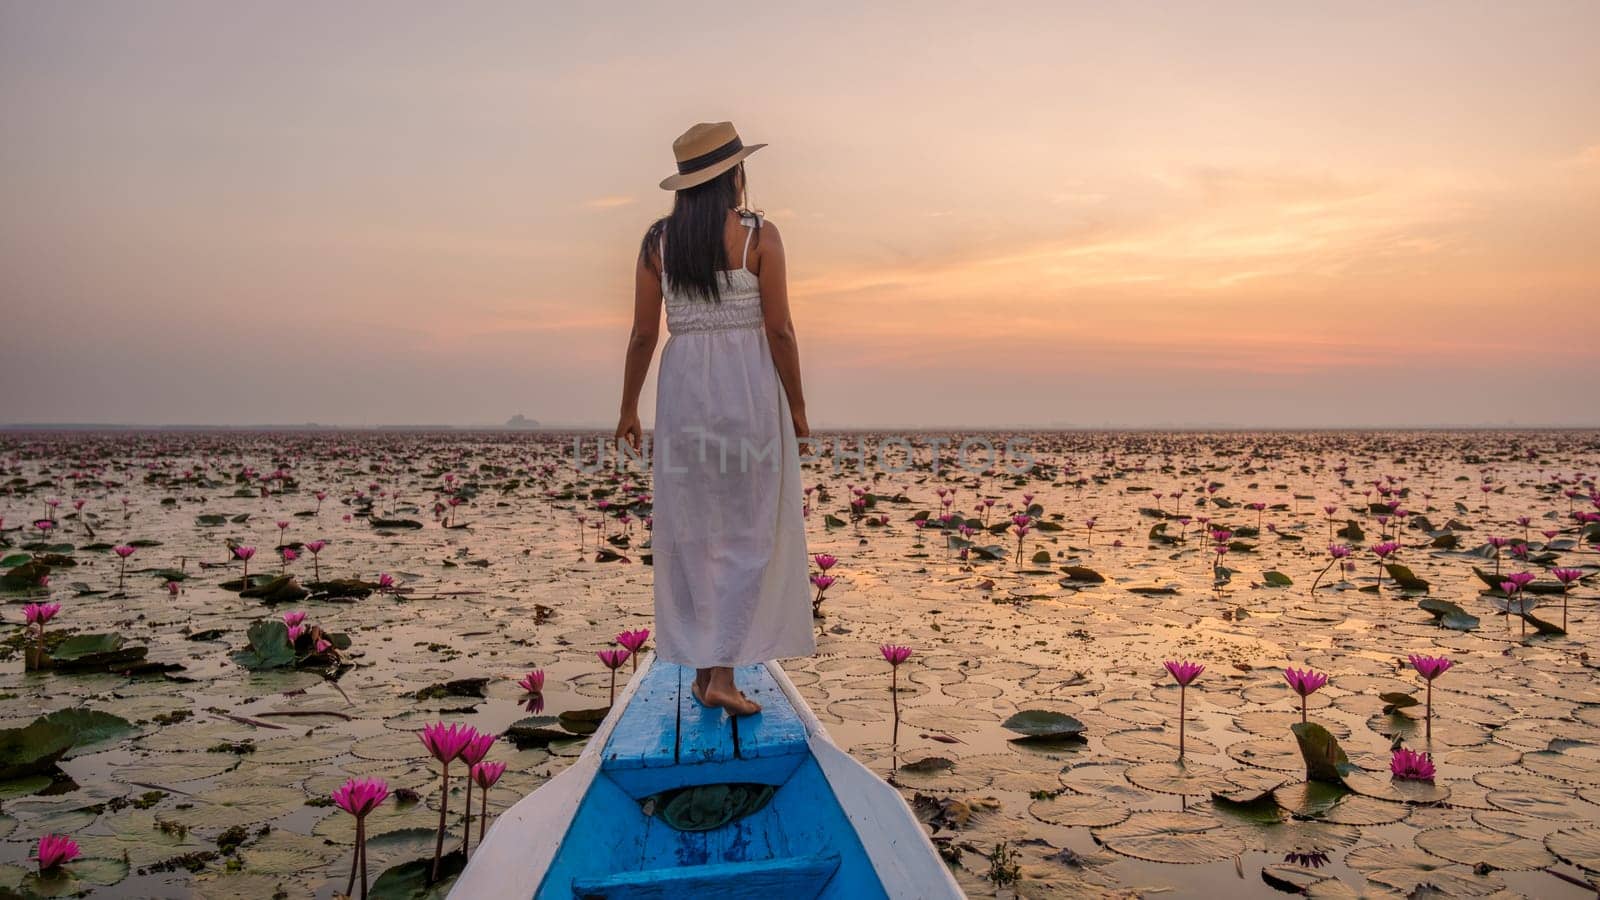 The sea of red lotus, Lake Nong Harn, Udon Thani, Thailand. Asian Thai woman with a hat and dress on a boat at the Red Lotus Lake in the Isaan